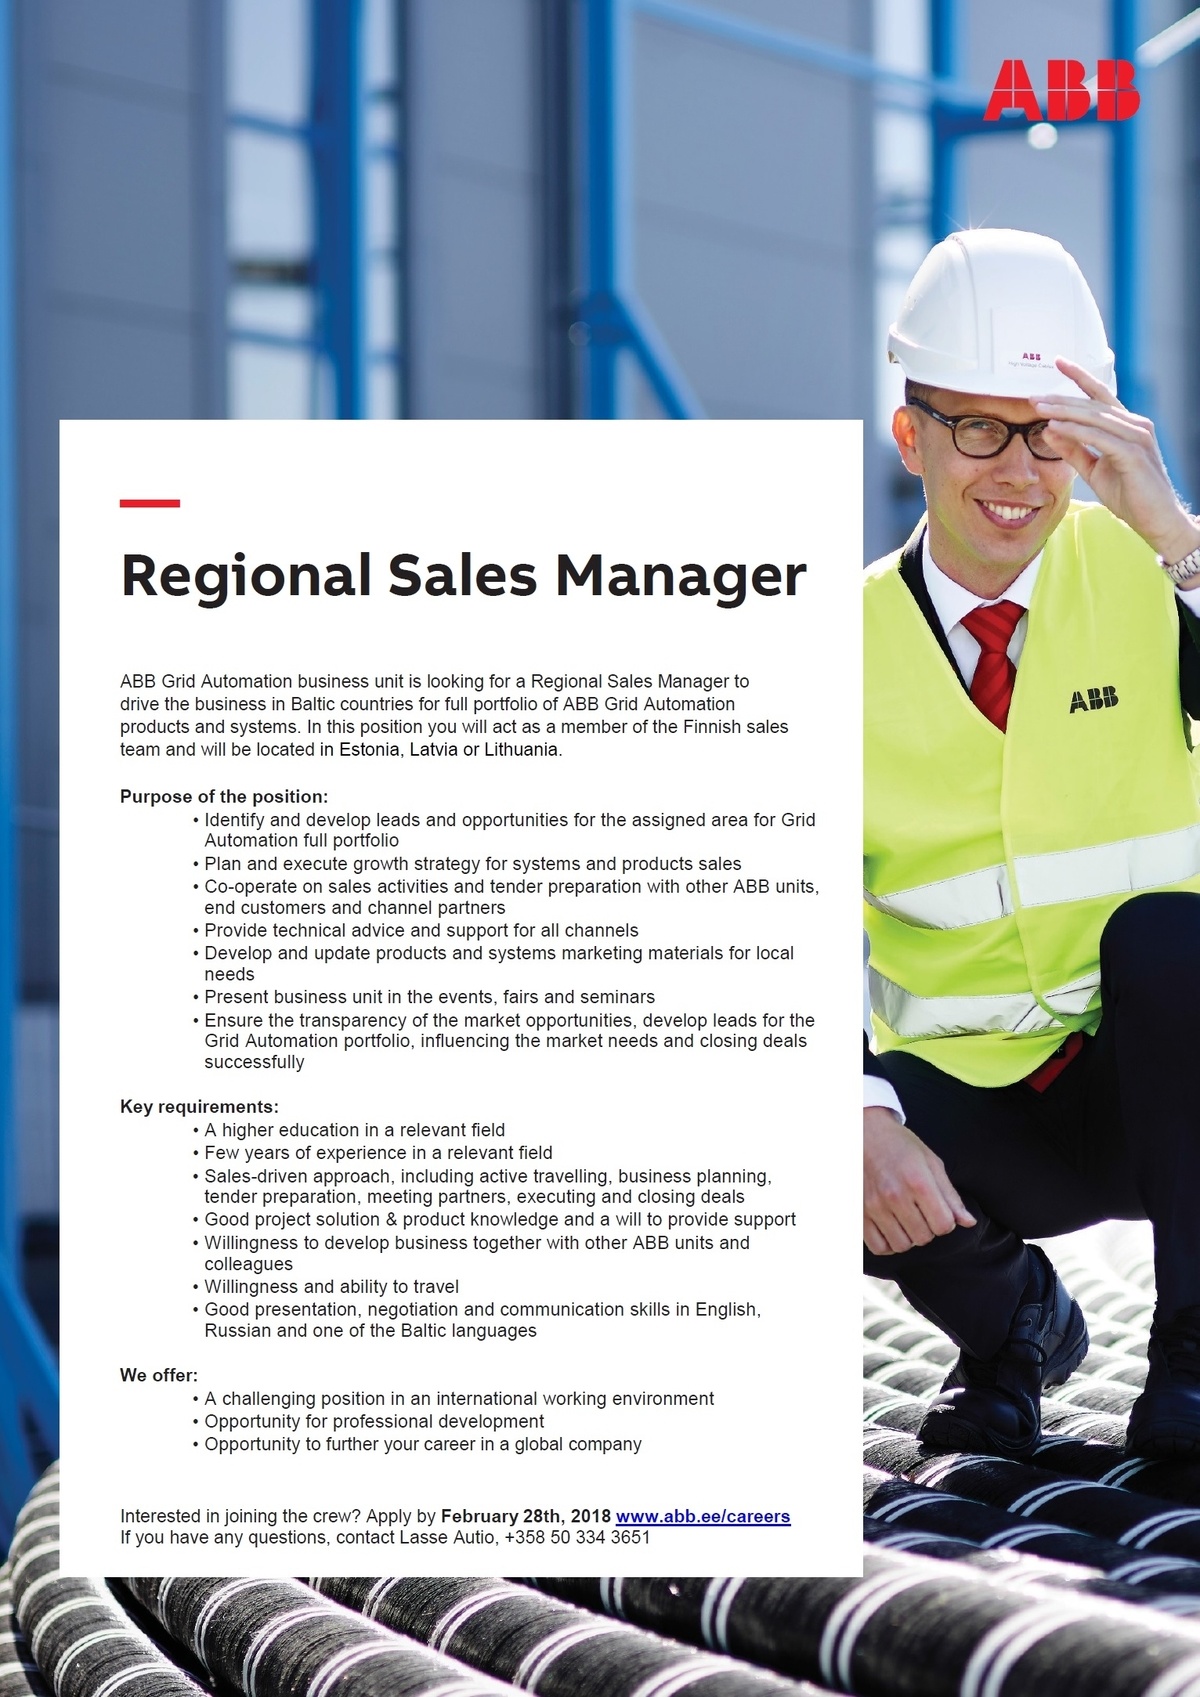 ABB AS Regional Sales Manager